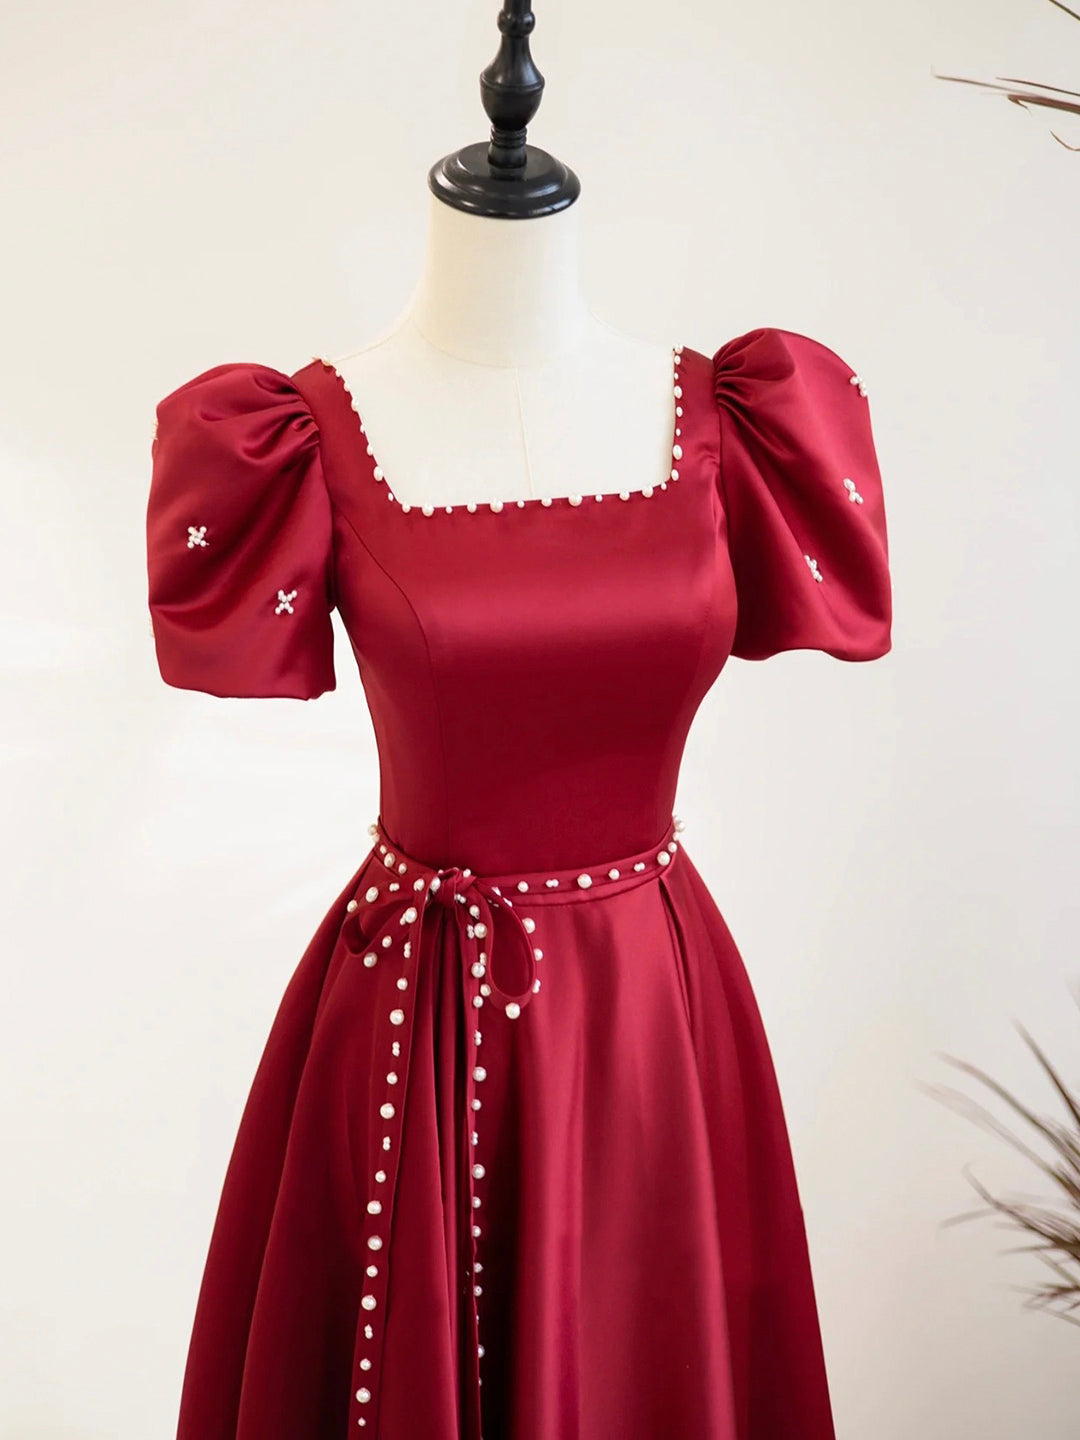 Party Dress For Over 64, Burgundy Satin Short Sleeve Floor Length Prom Dress, Burgundy Evening Dress with Pearls